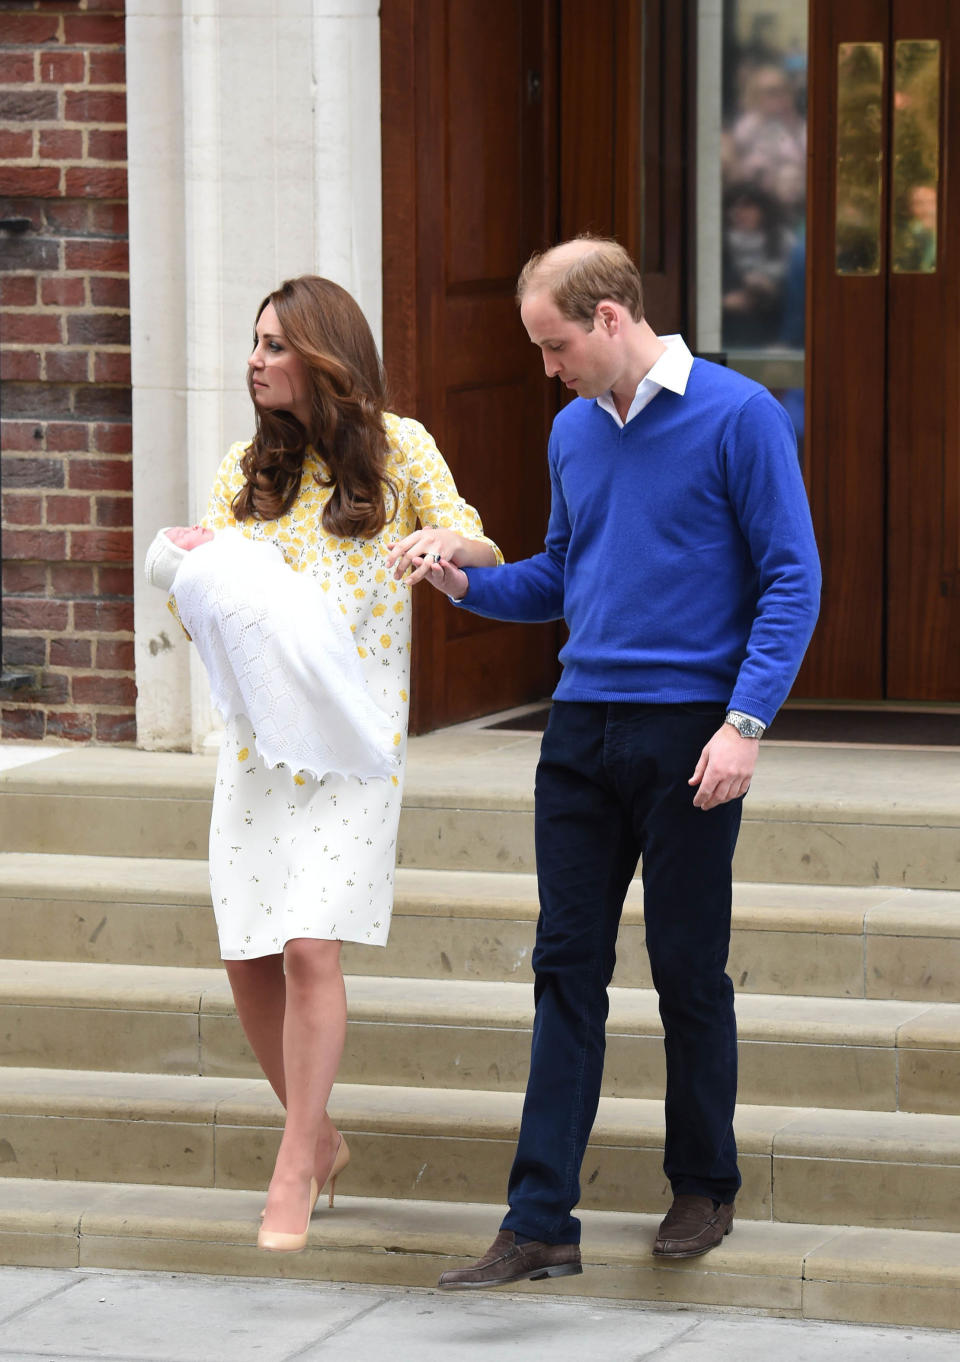 Photo by: KGC-03/STAR MAX/IPx The Princess of Cambridge is seen outside the Lindo Wing of St. Mary's Hospital with her parents Prince William The Duke of Cambridge and Catherine The Duchess of Cambridge.  The Princess was born on Saturday, May 2nd, 2015 at 8:34 AM weighing 8lbs. 3oz. (Star Max/IPX via AP Images)